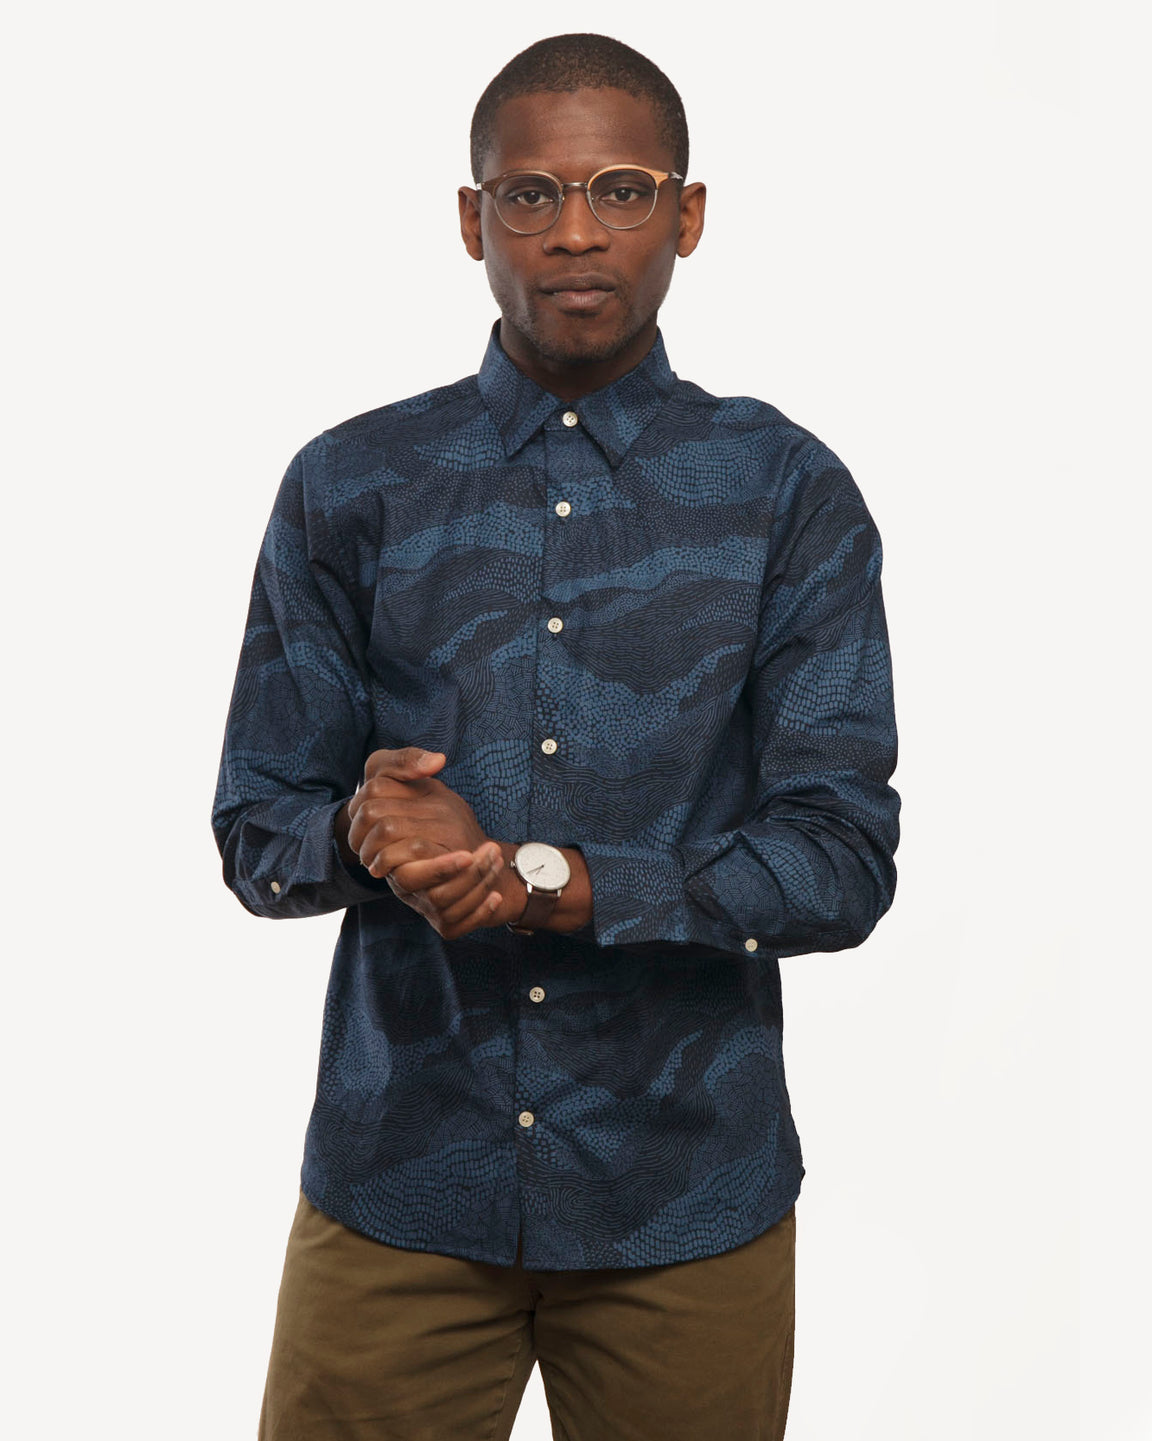 Men's Shirts For Sale Canada | Button-Down Shirts for Men Online